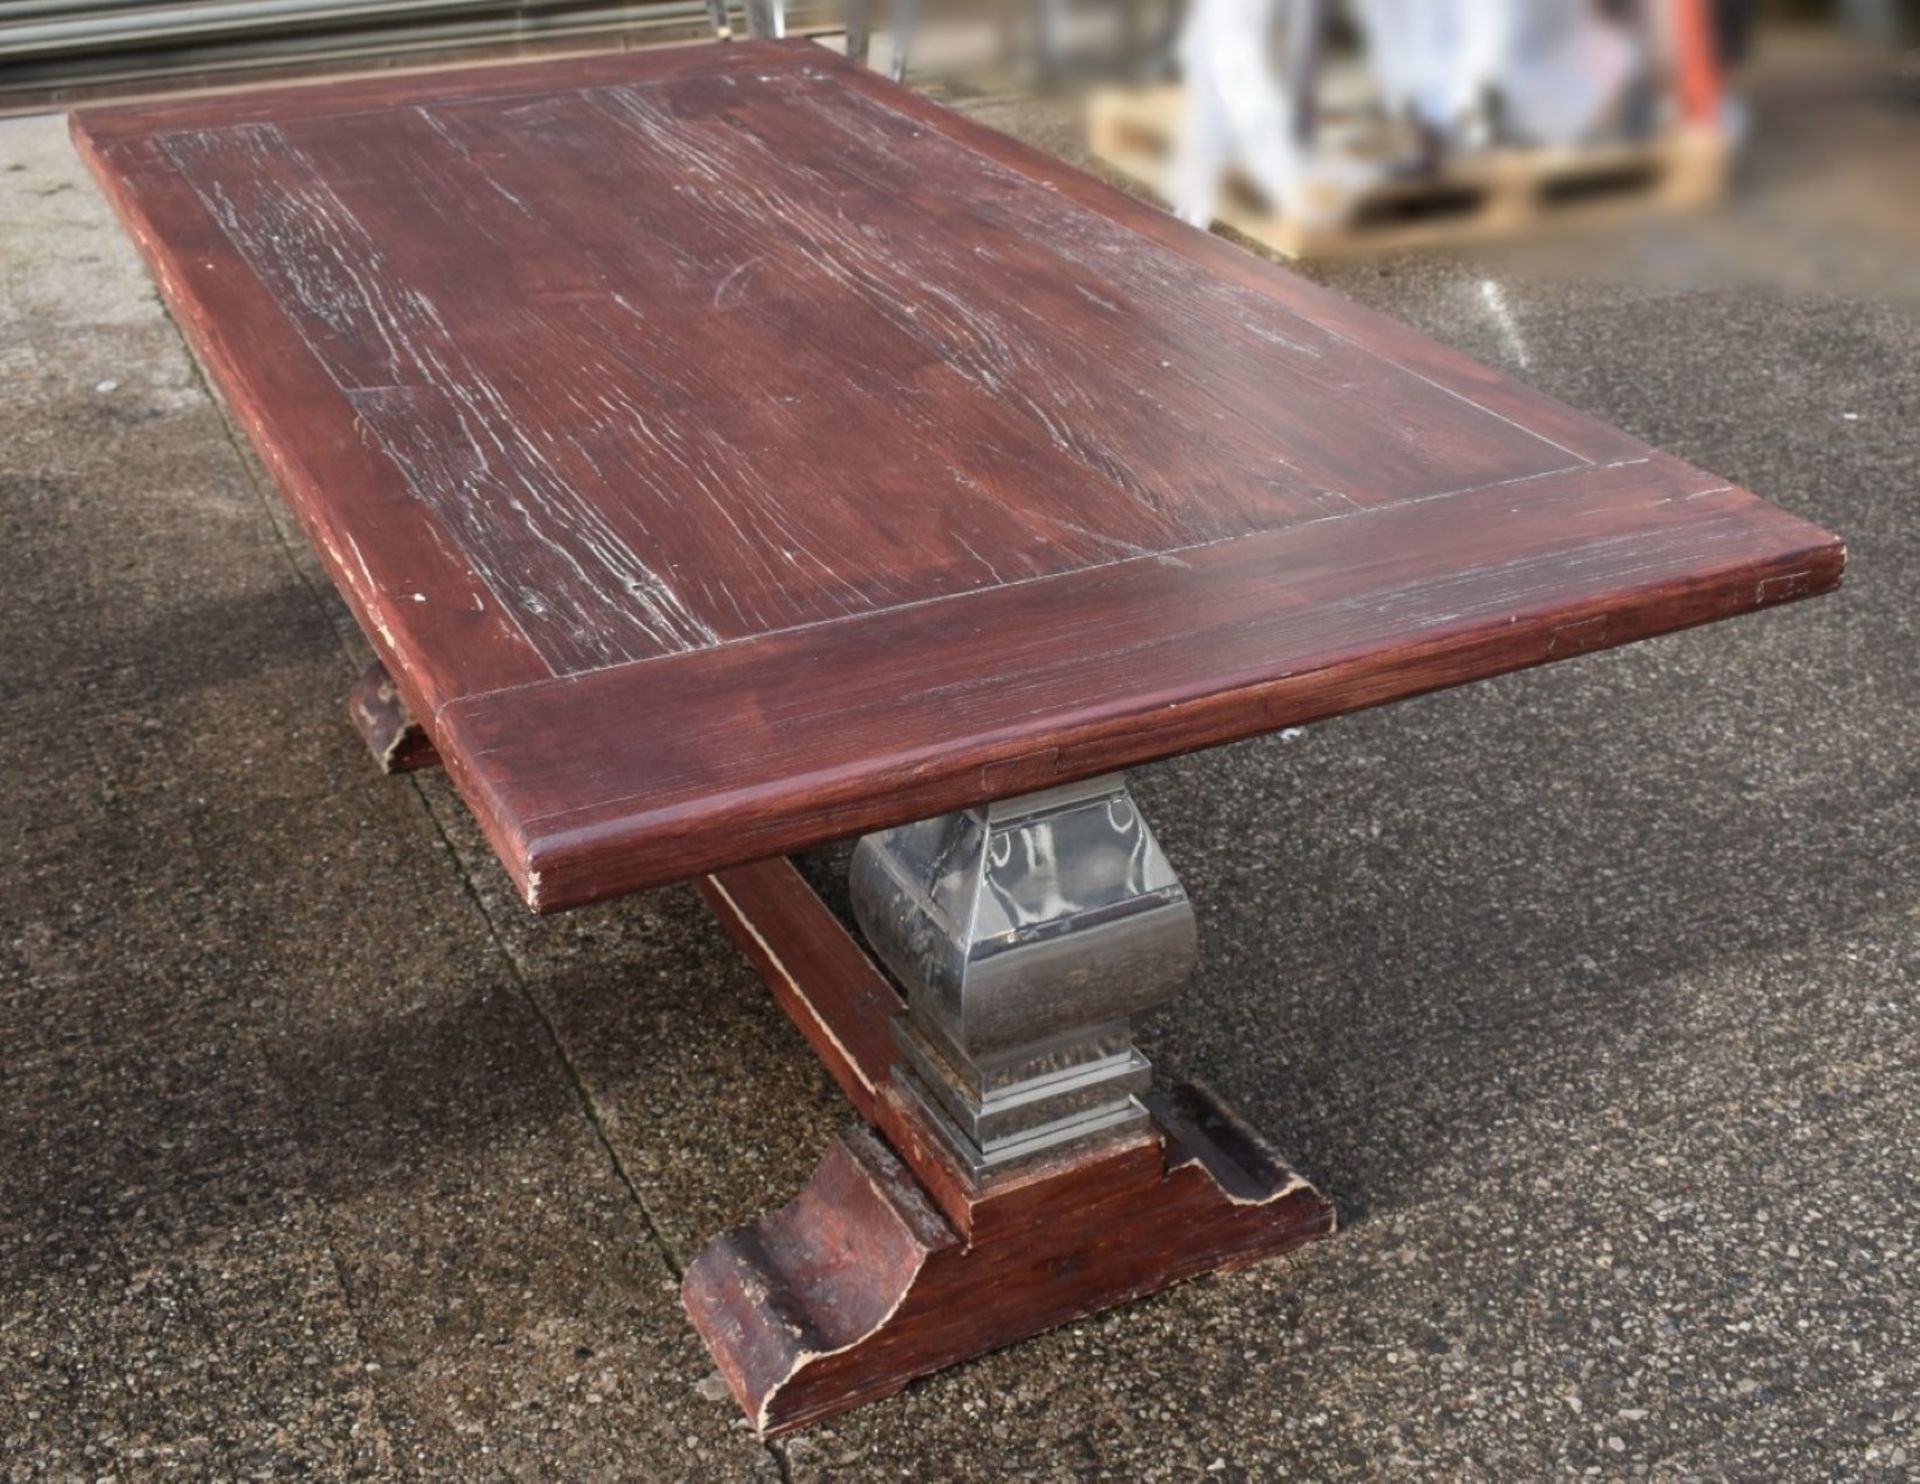 1 x Commercial 2-Metre Rustic Timber Banquet Dining Table - Image 3 of 9